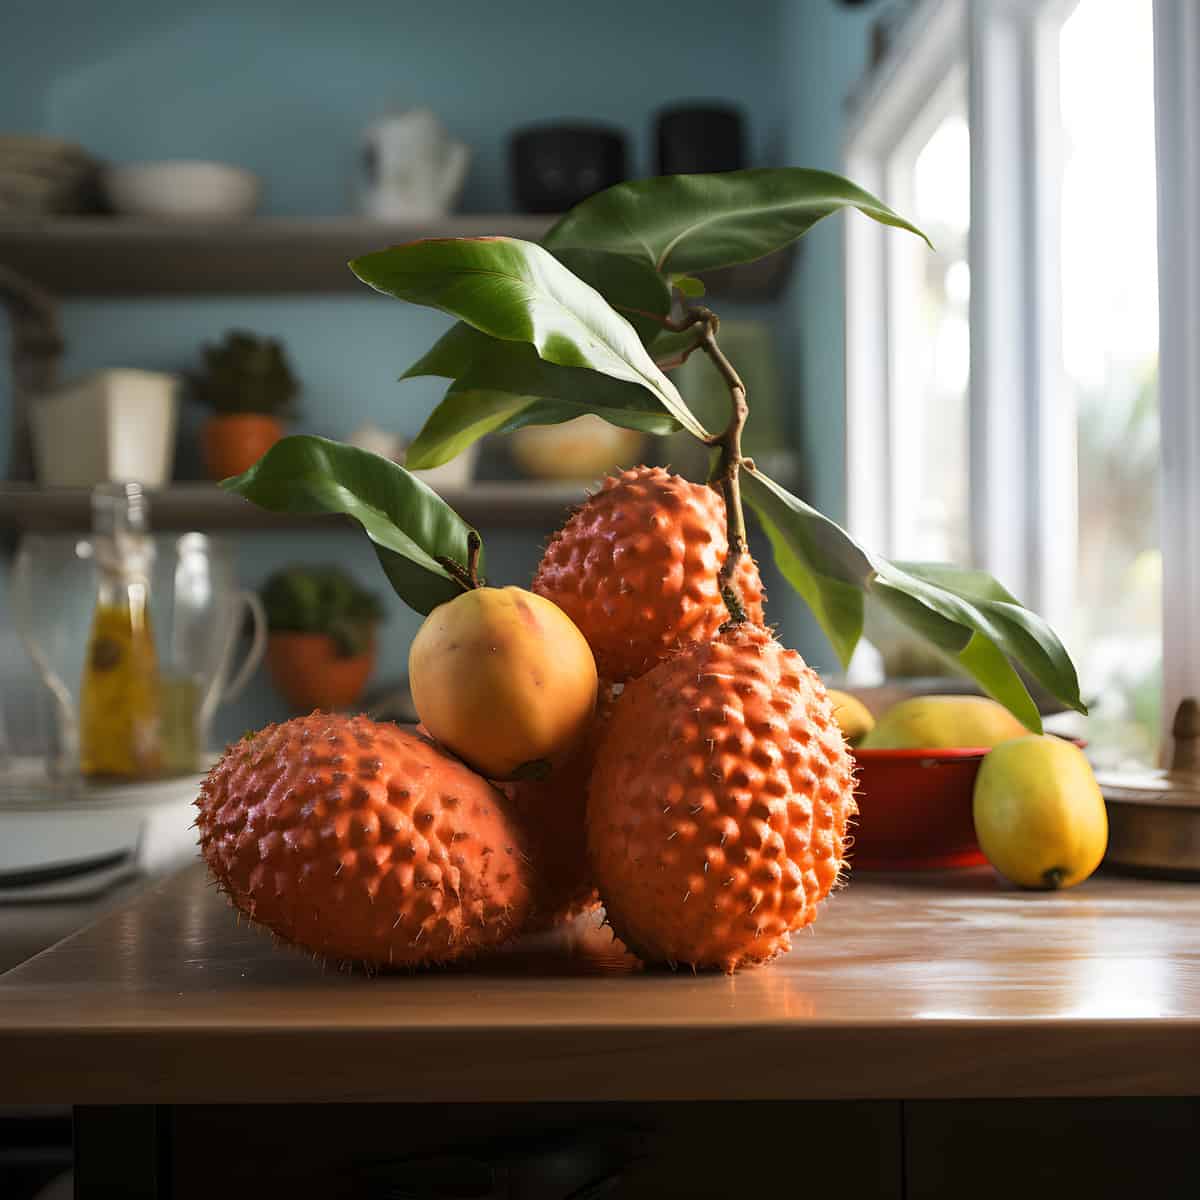 Charichuelo Fruit on a kitchen counter